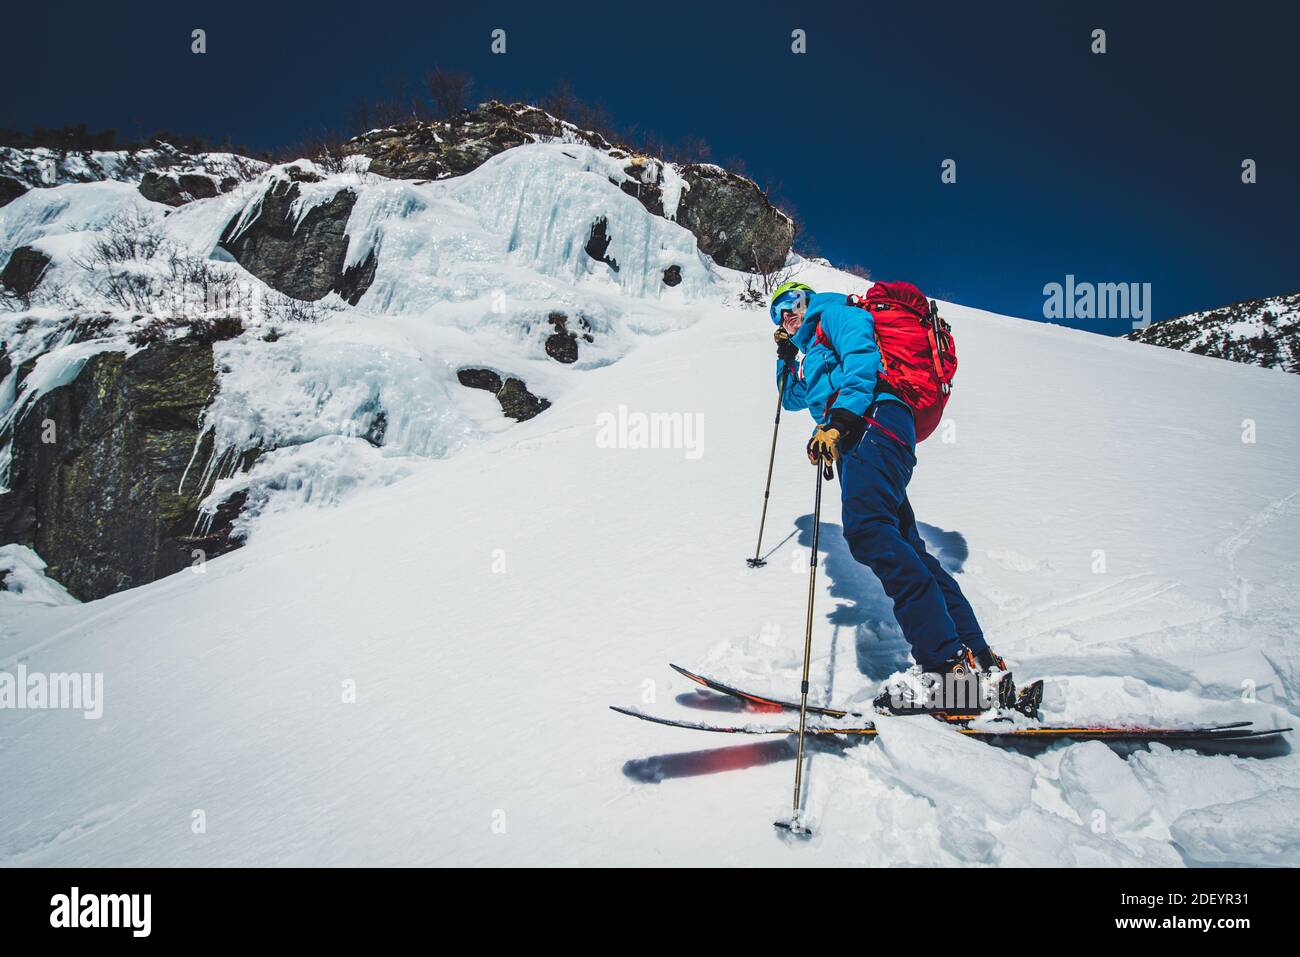 Man stopped while skiing down Tuckerman Ravine in New Hampshire Stock Photo